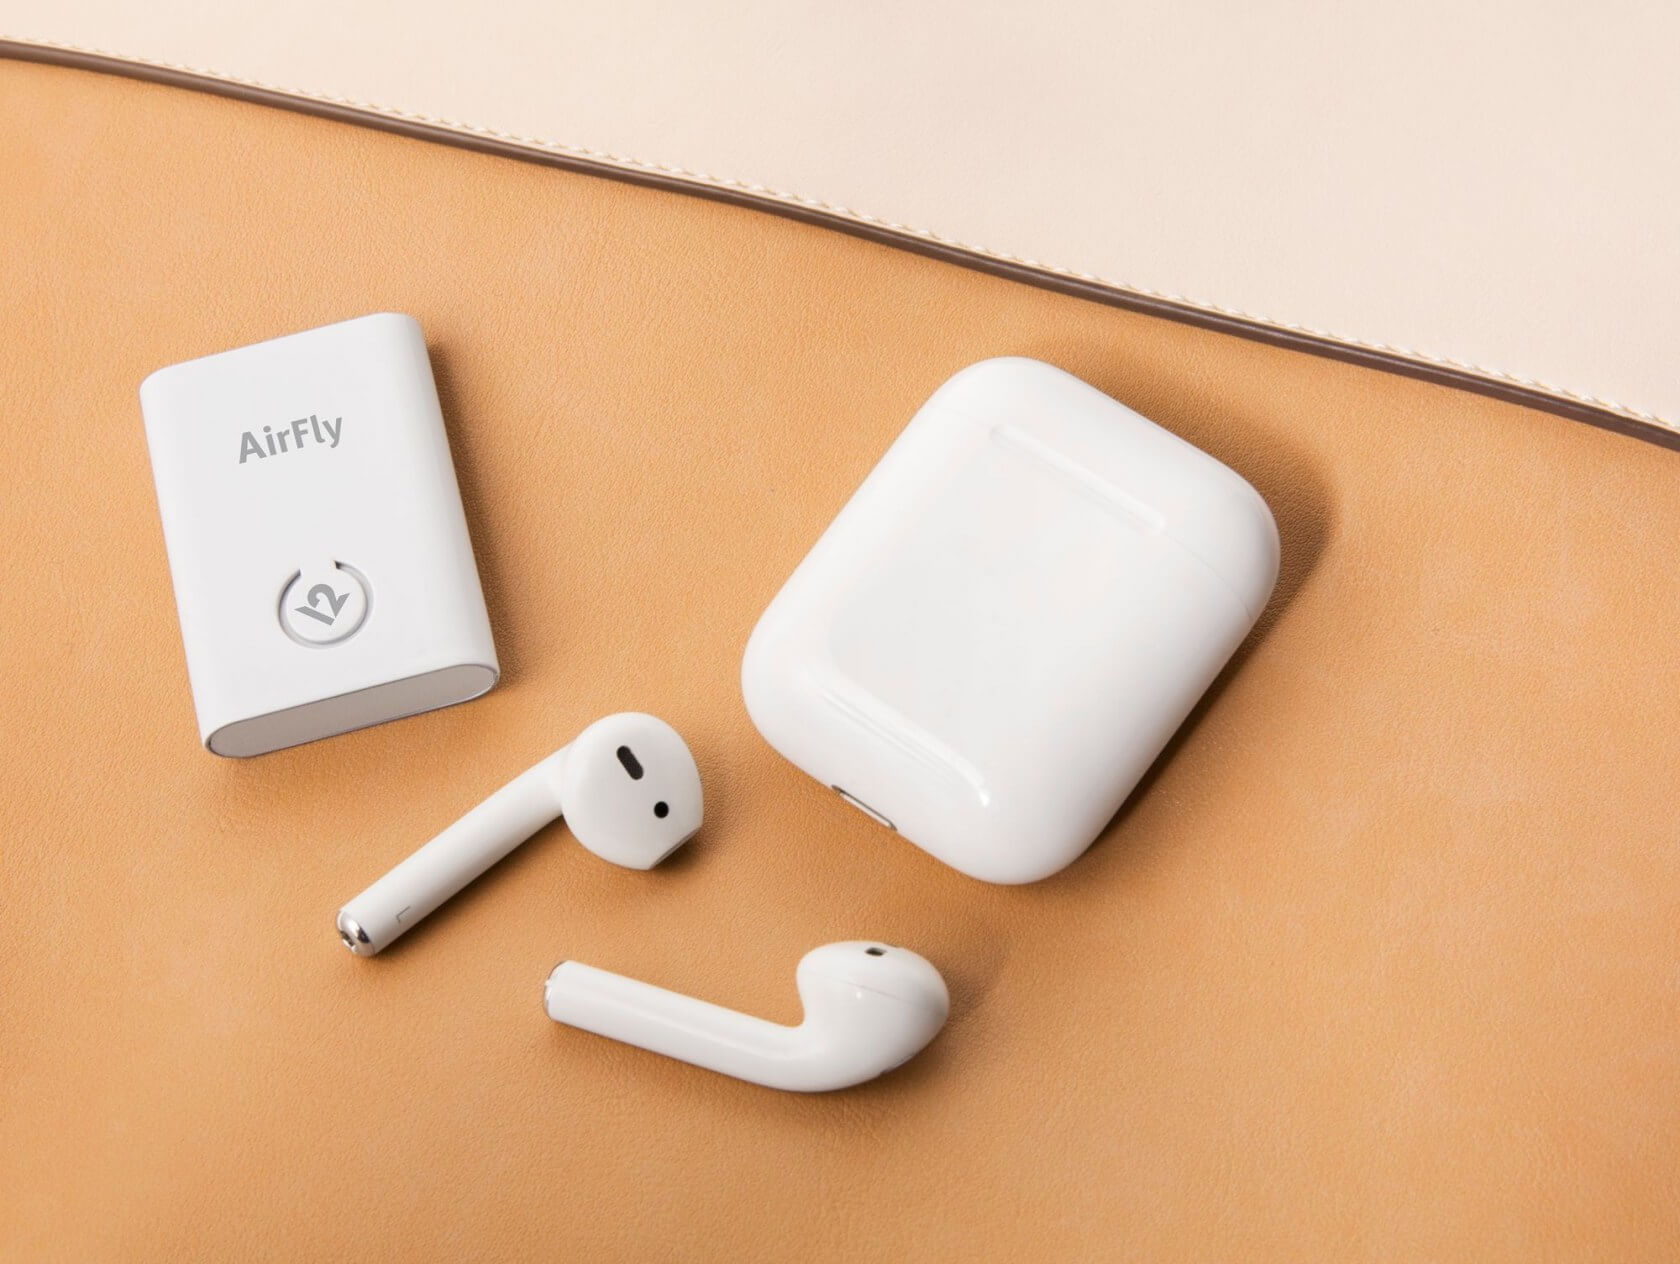 To separate to add Resembles Twelve South launches AirFly to connect your AirPods to anything | TechSpot